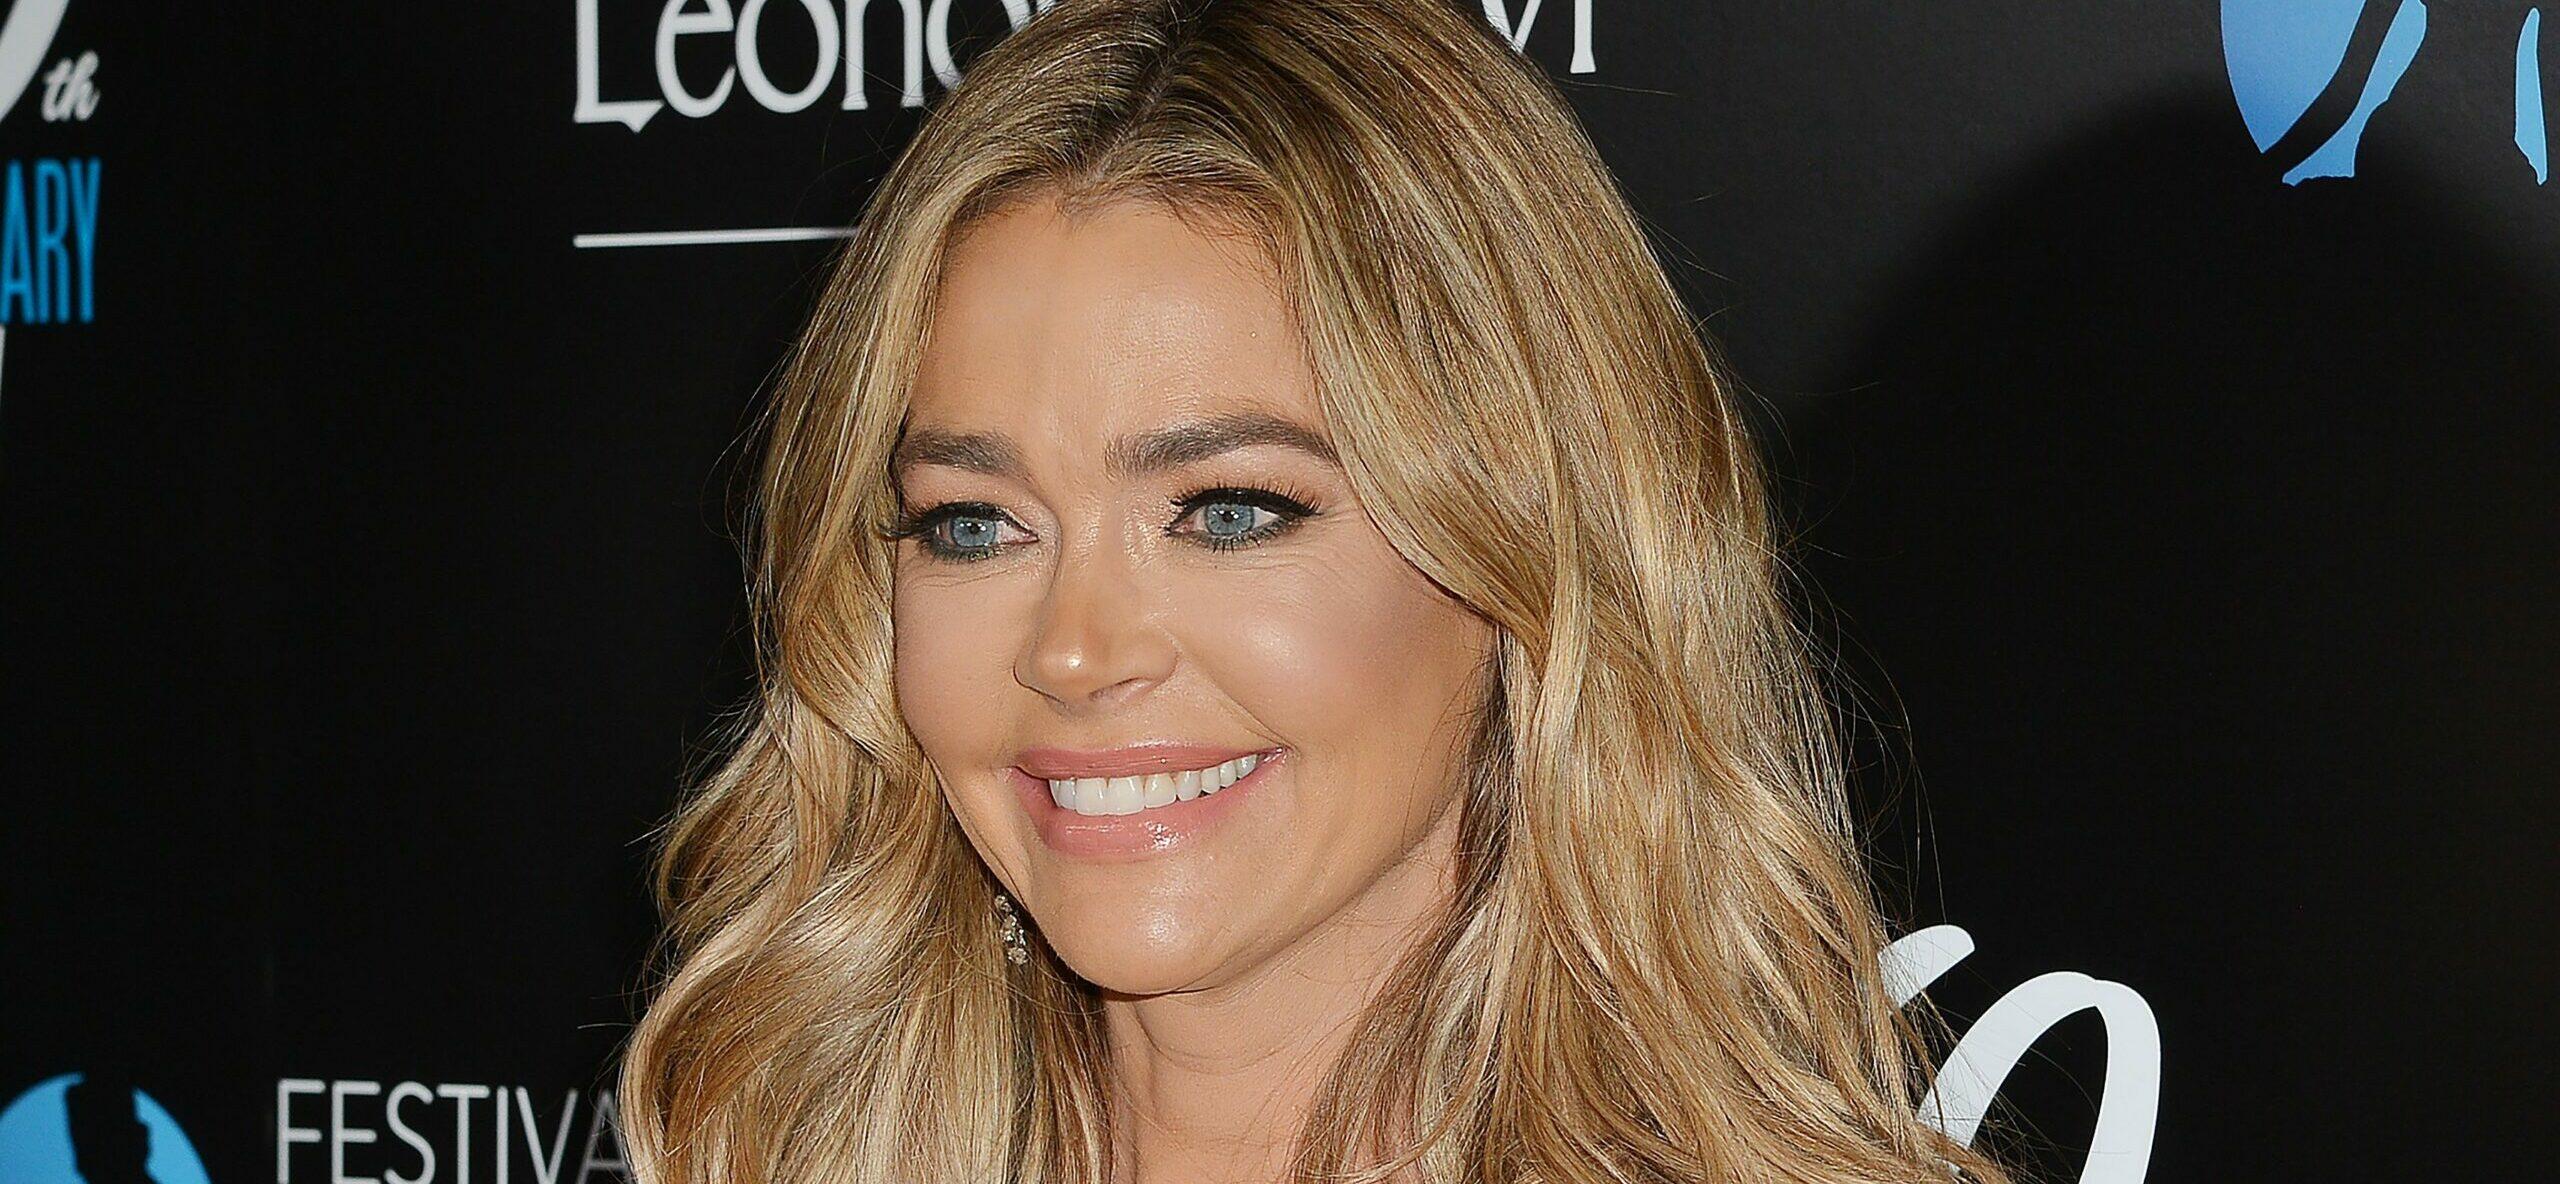 Denise Richards Wears Nothing But An American Flag For The Fourth Of July